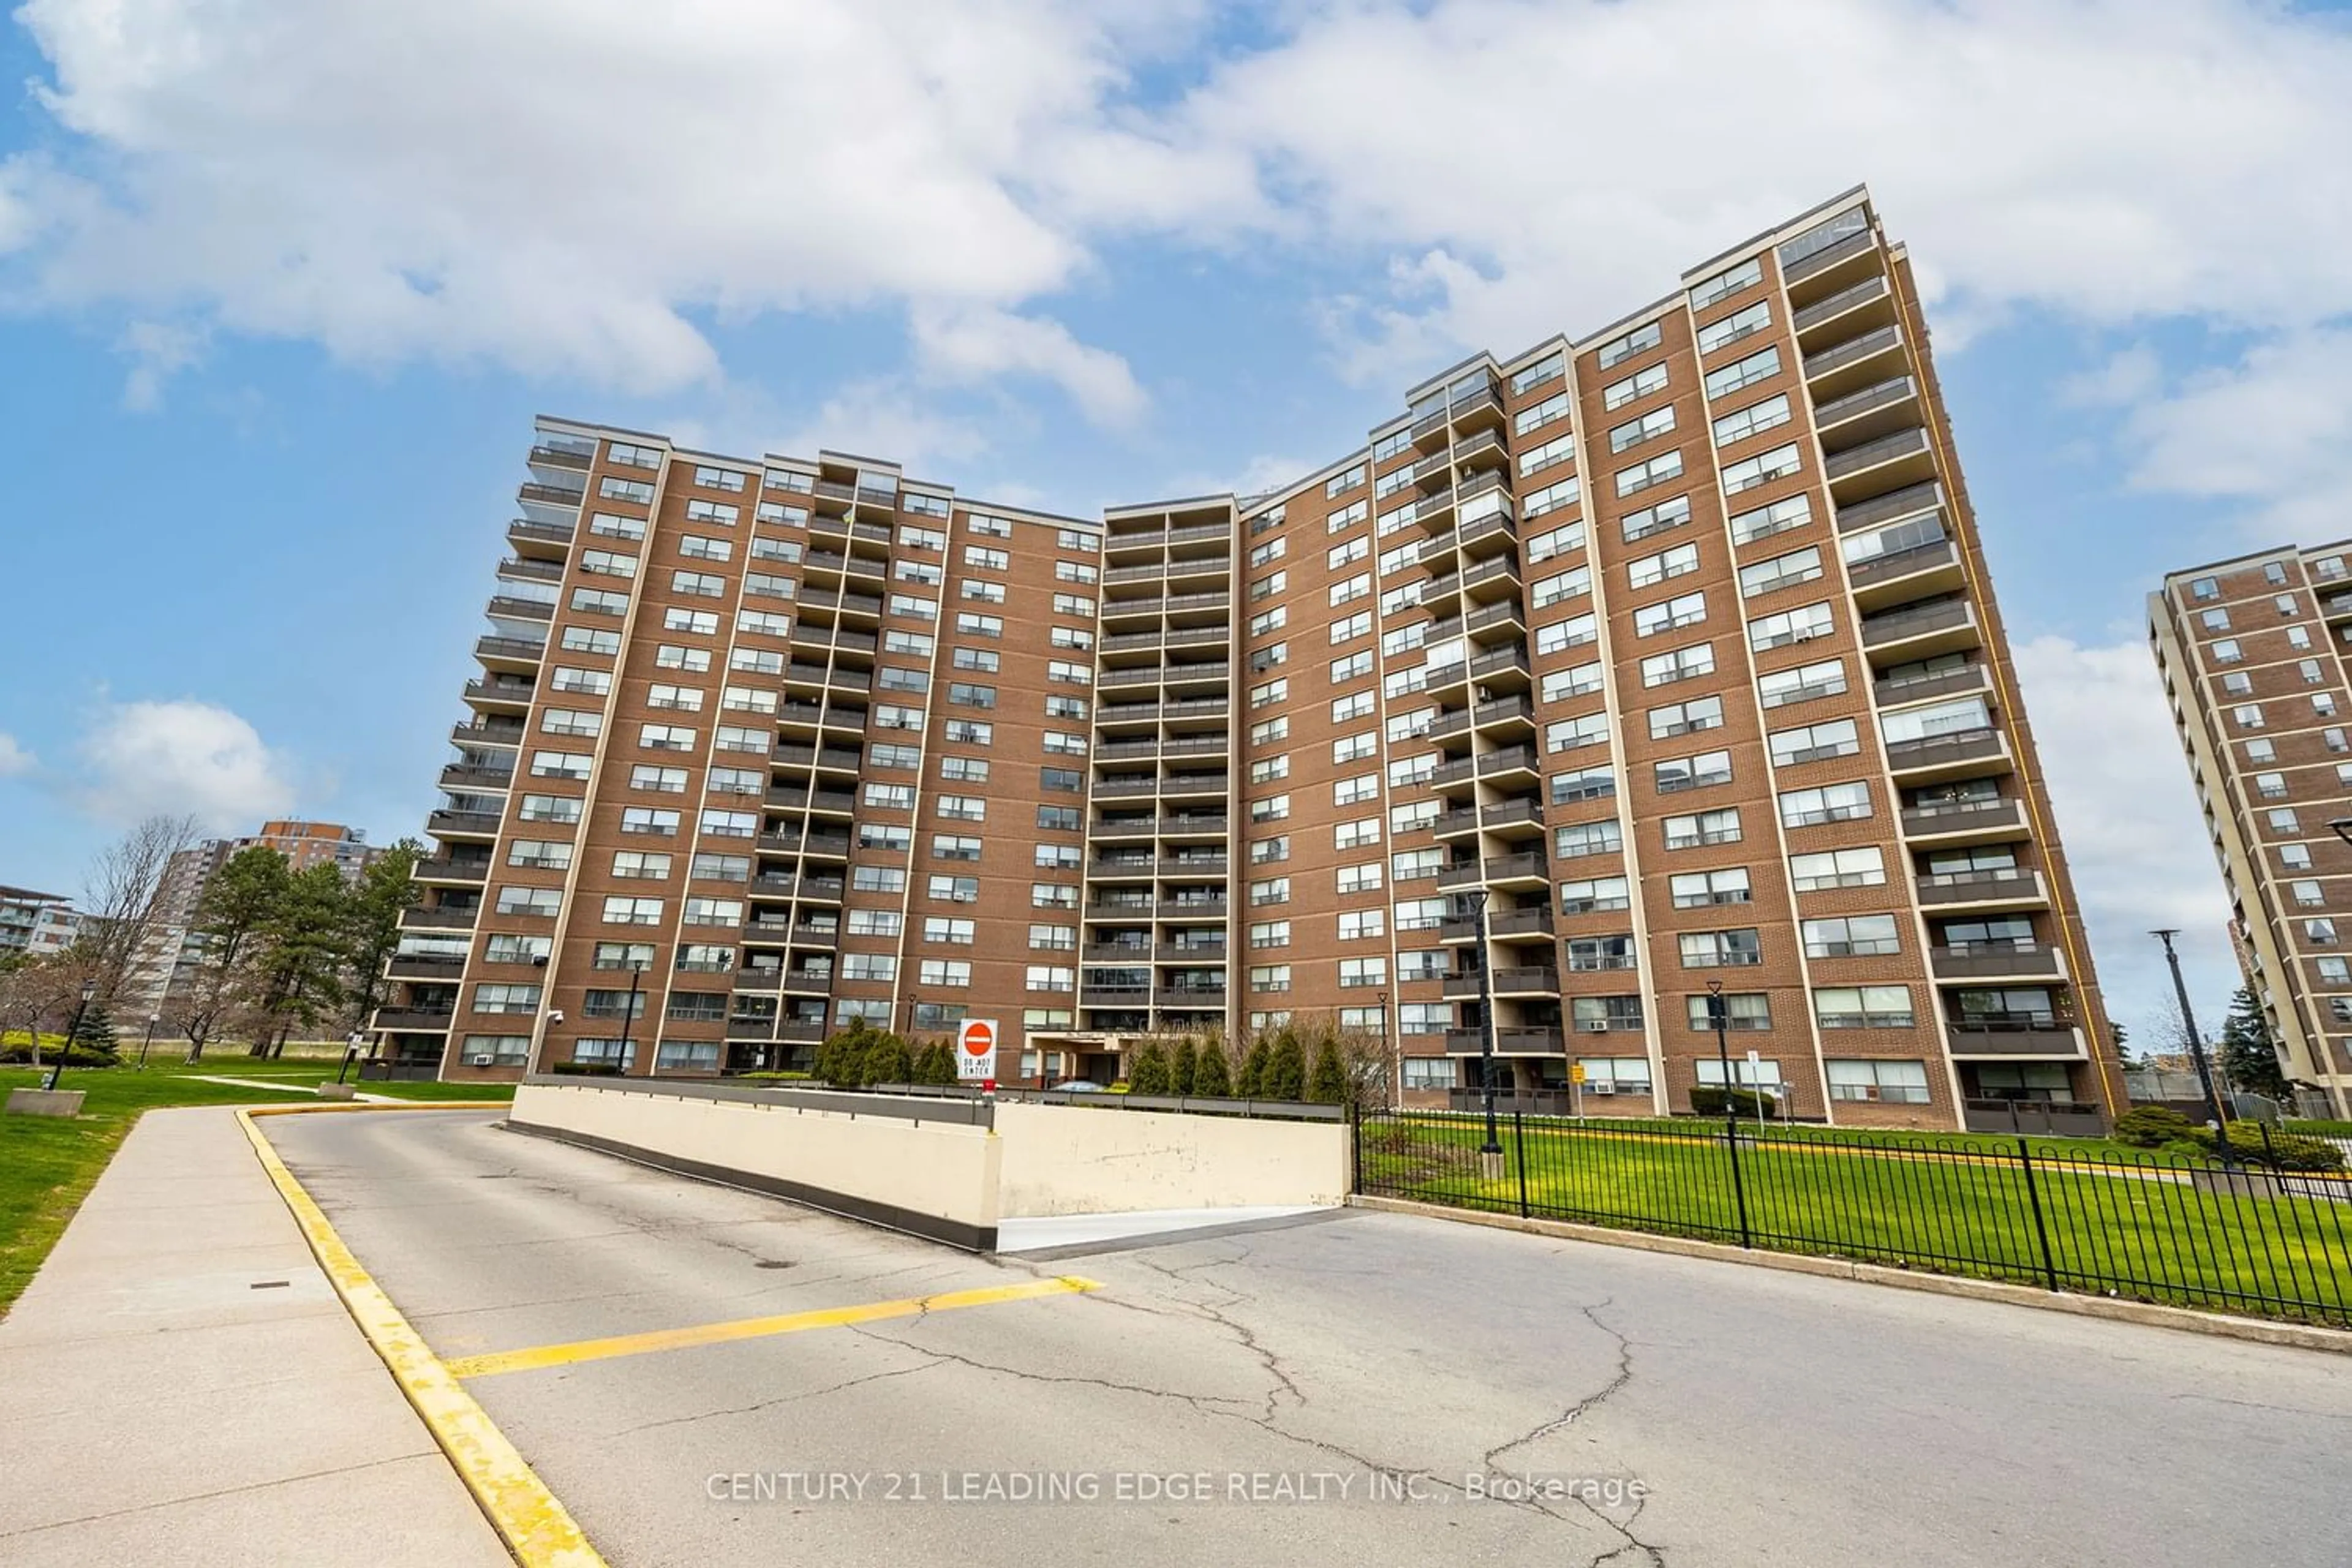 A pic from exterior of the house or condo for 551 The West Mall #519, Toronto Ontario M9C 1G7